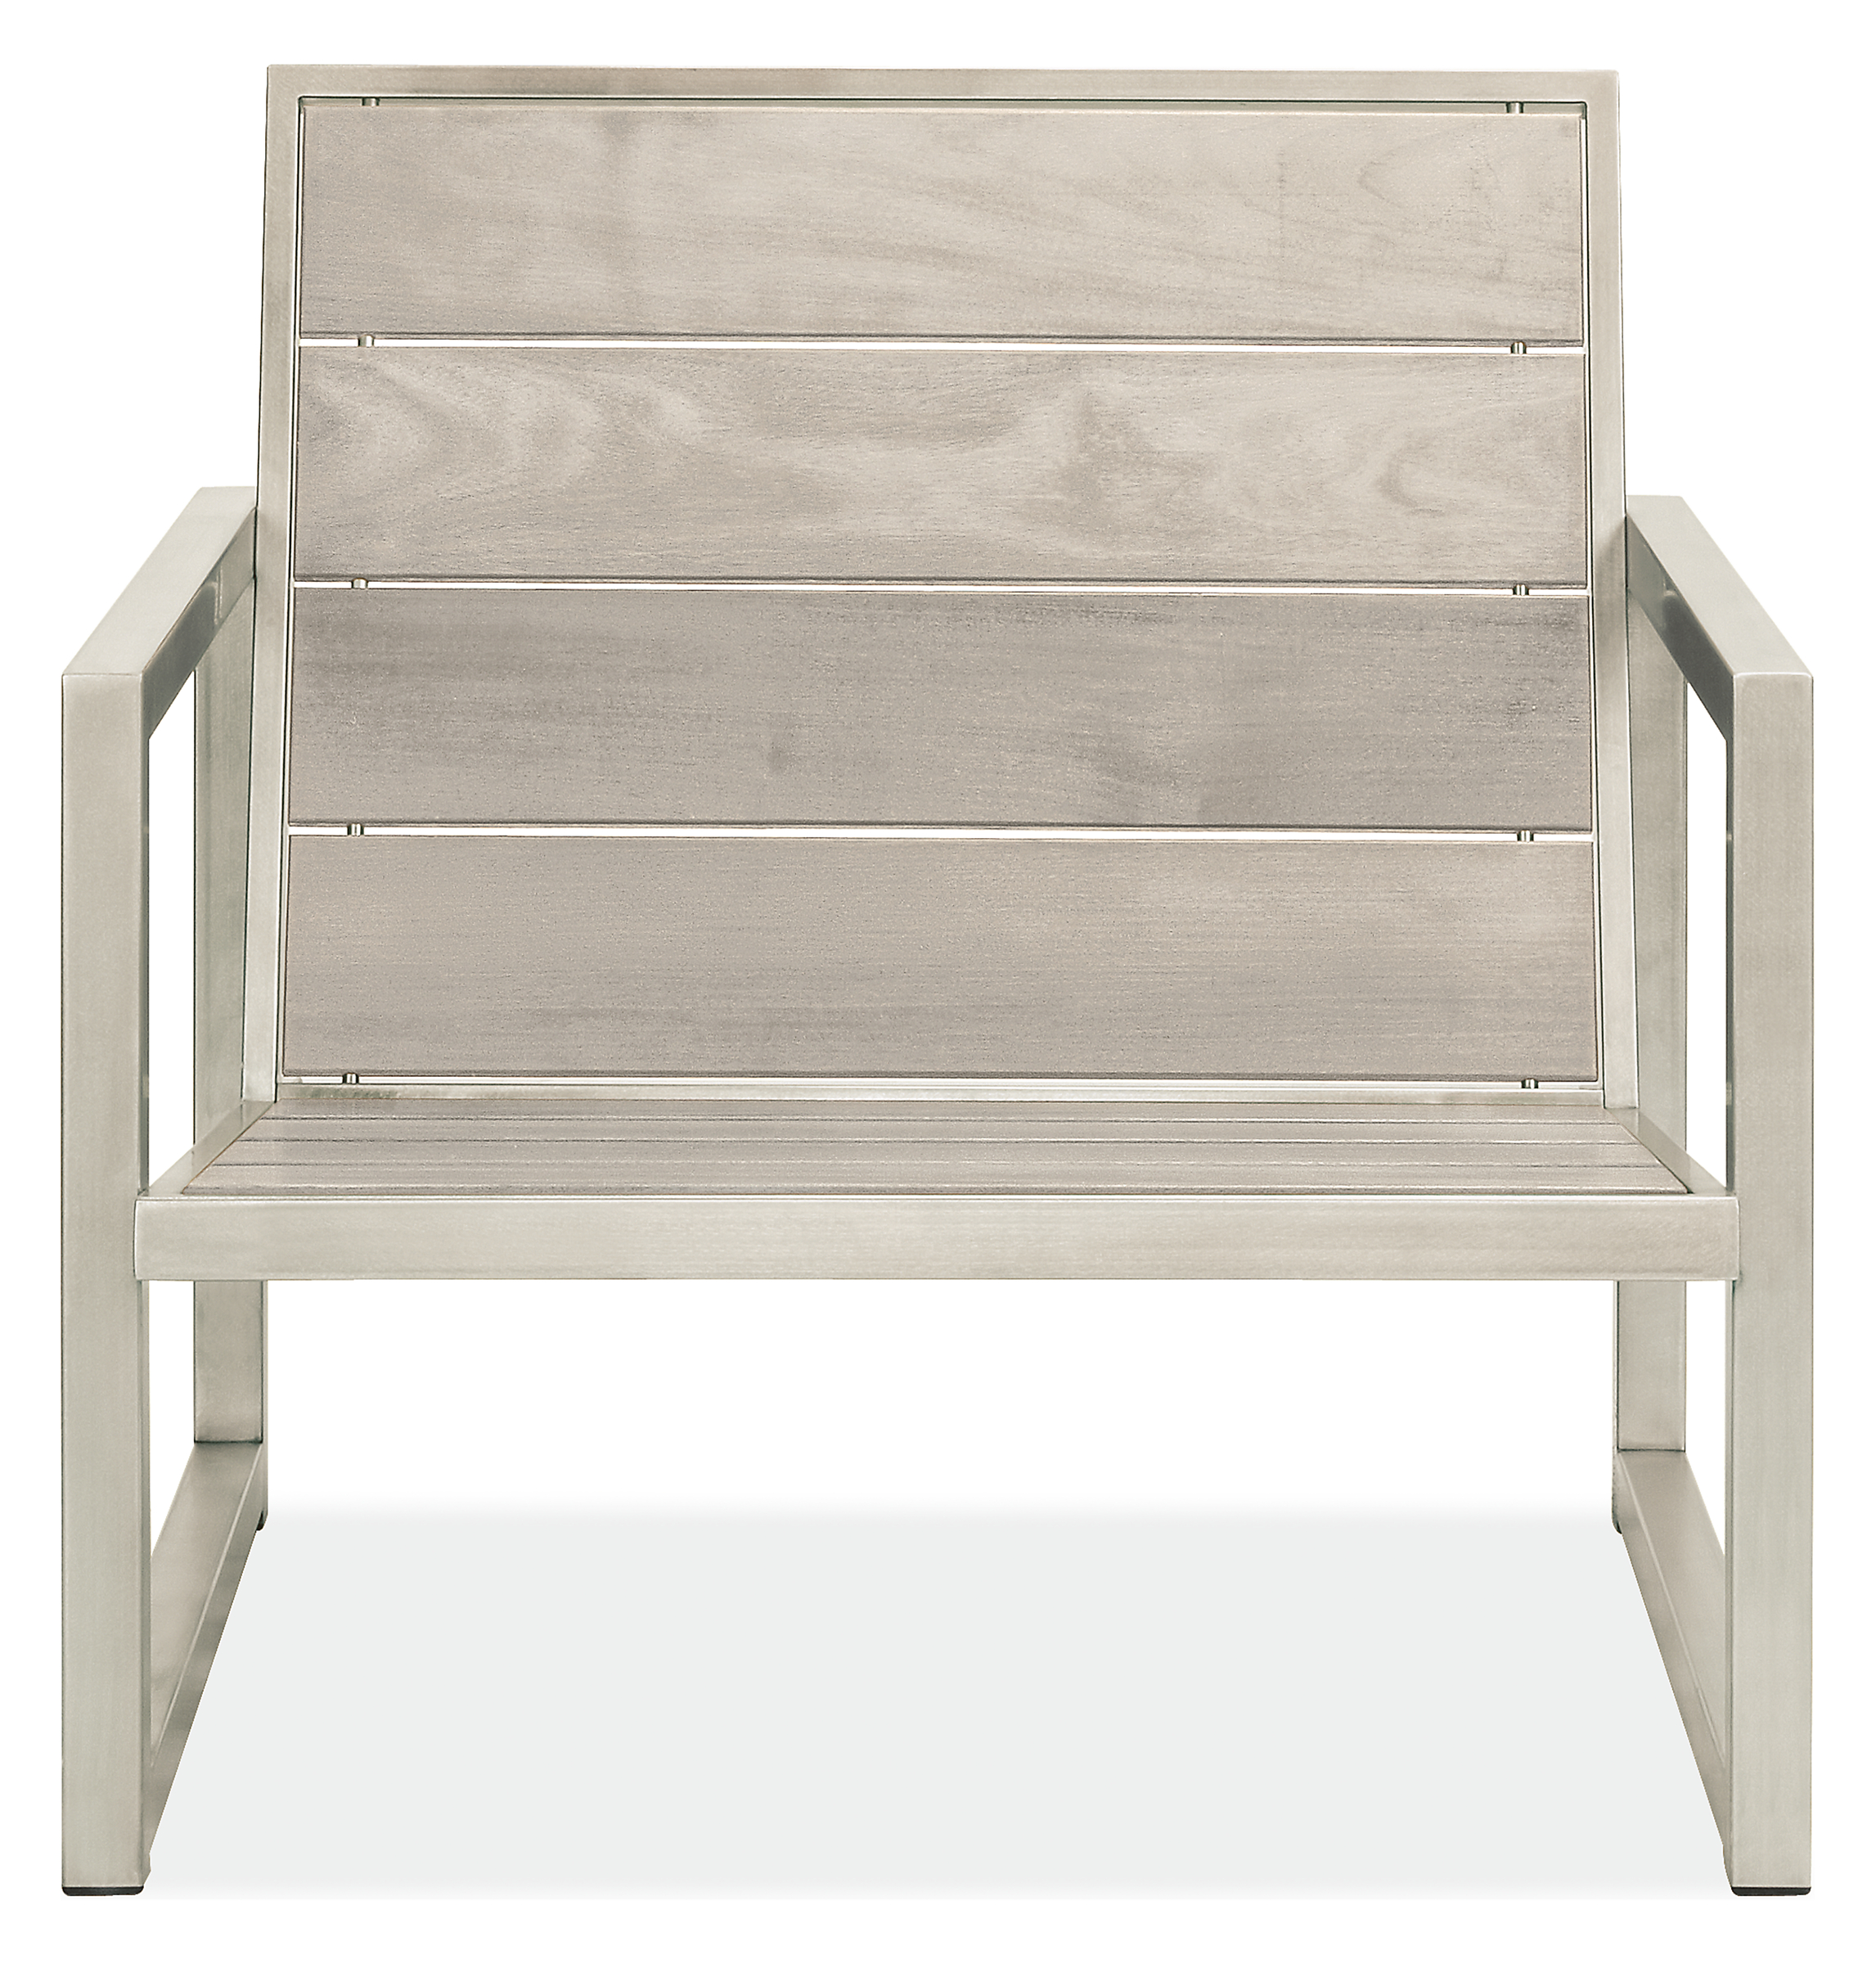 front view of Montego 32-inch Lounge Chair in aged Reclaimed Ash and stainless steel frame.